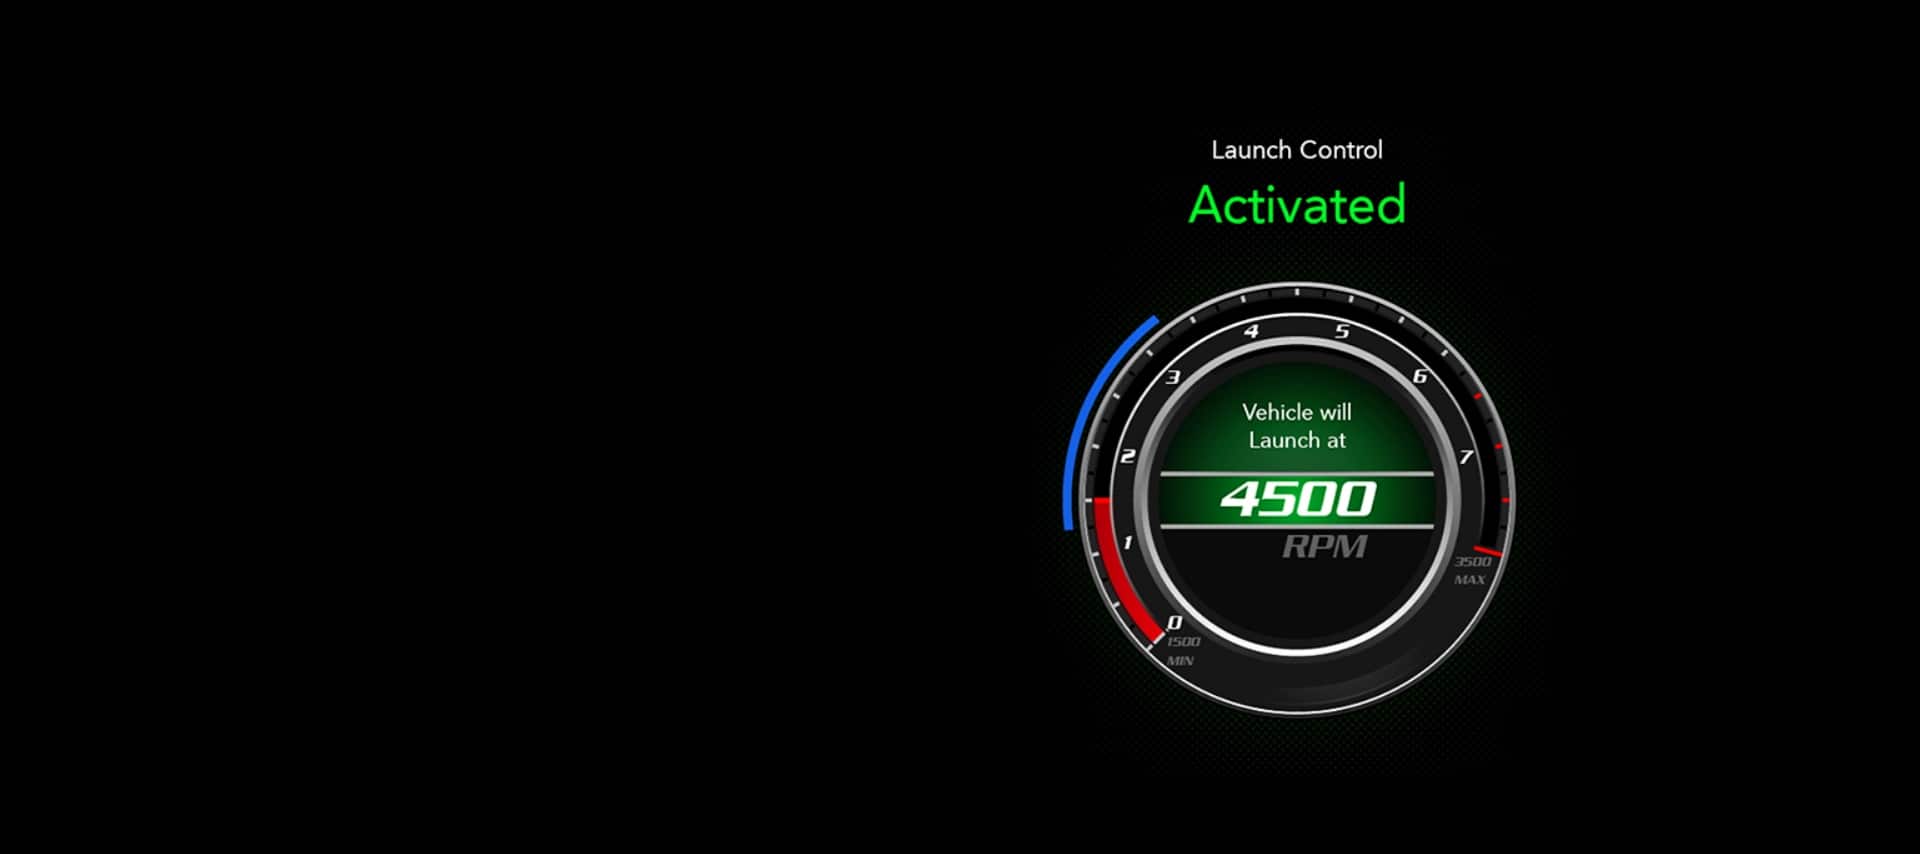 A close-up of the Launch Control screen in the 2021 Ram 1500 TRX, indicating that the vehicle will launch at 4500 RPM.